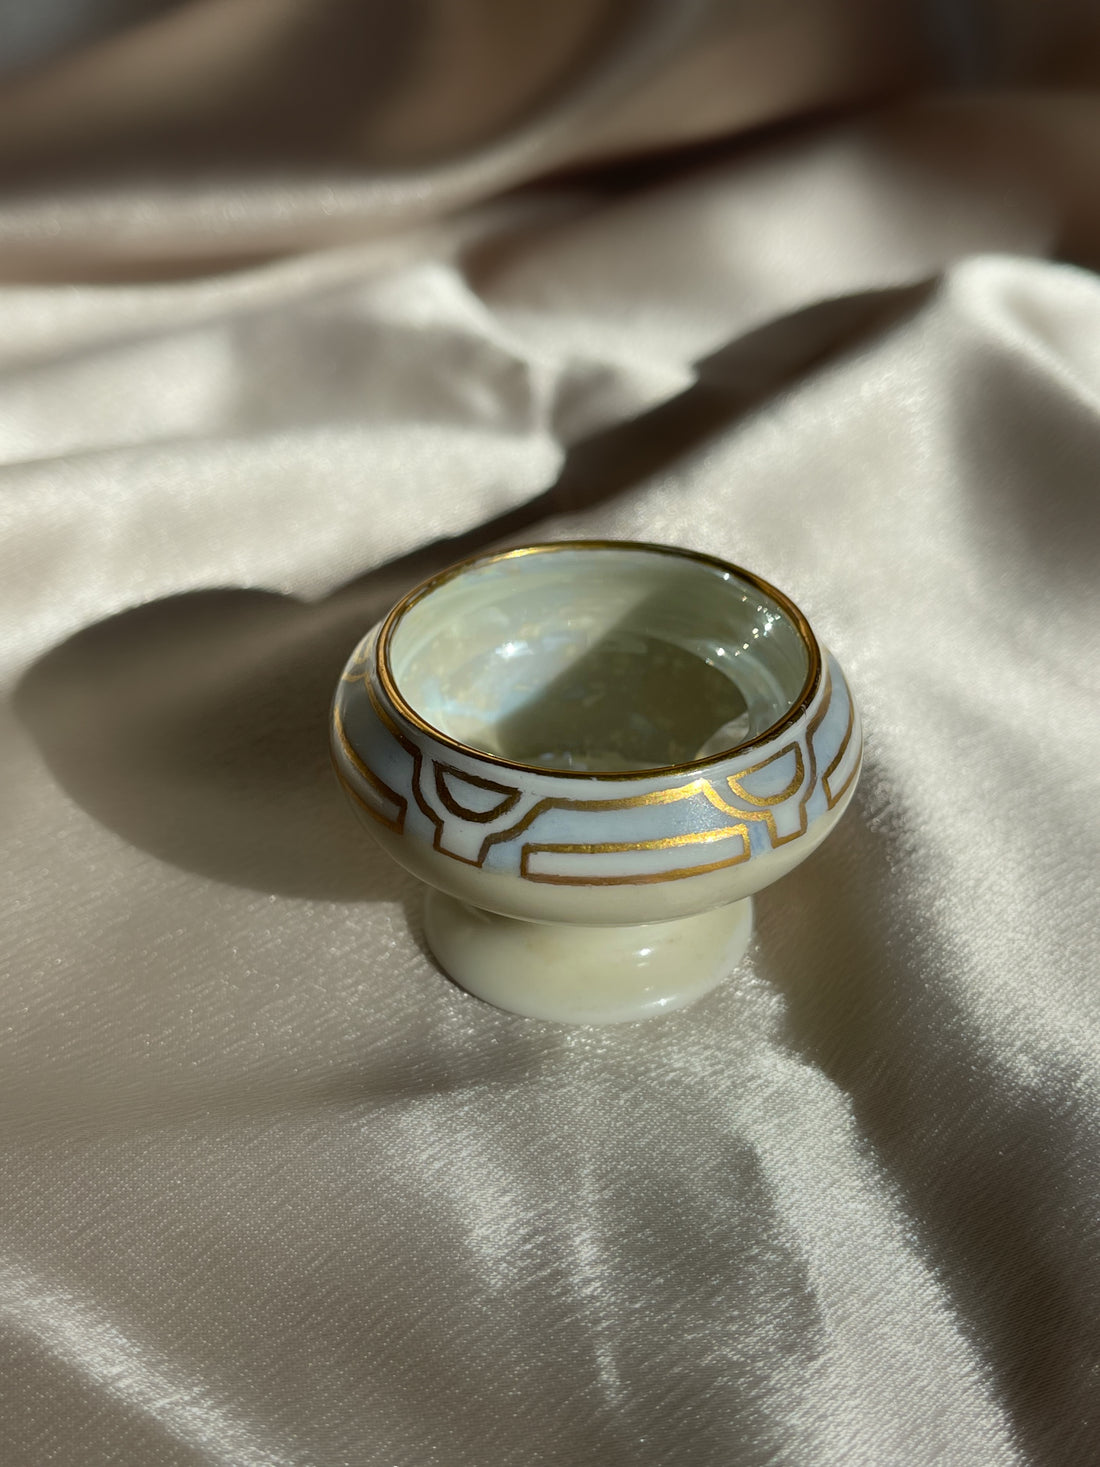 A fine porcelain Royal Austria Austrian ring dish trinket dish with a gold trim and blue detail, dating to the early 1900s, Art Nouveau